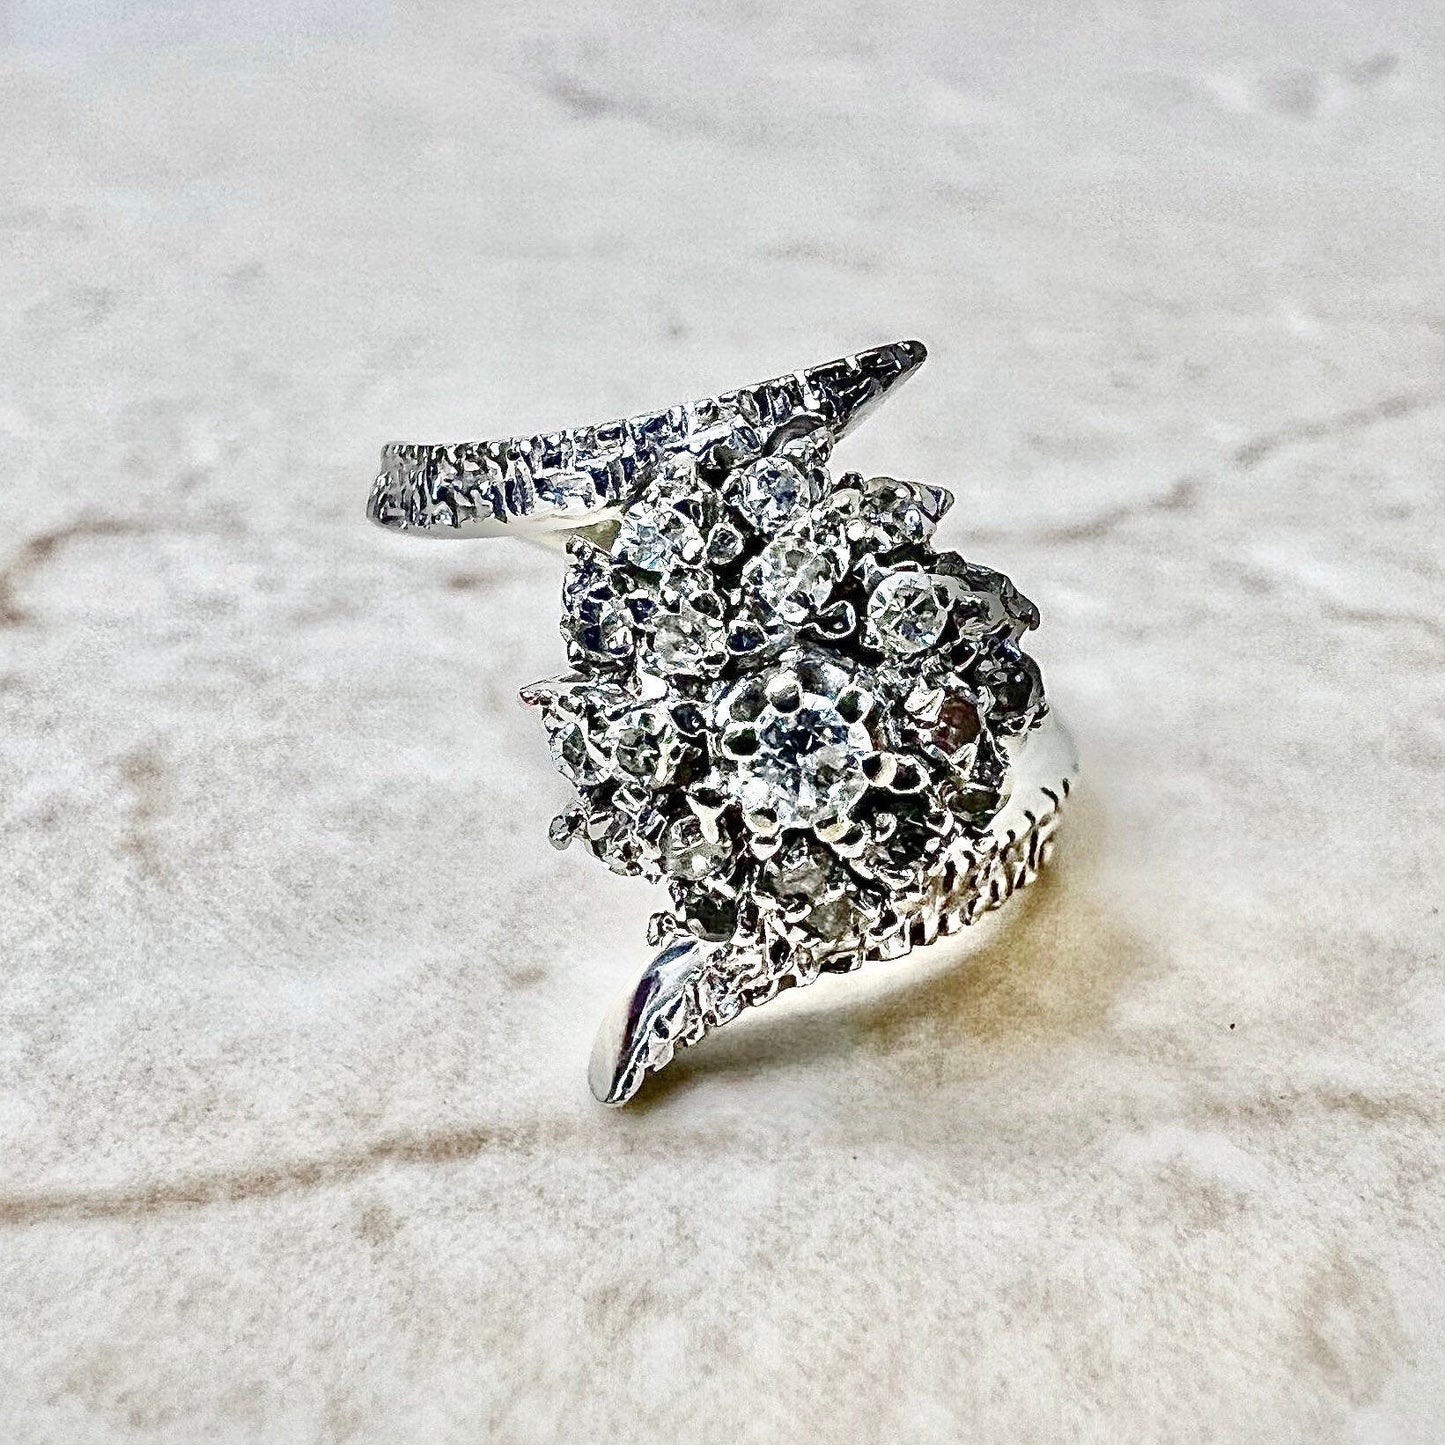 14K Cluster Diamond Ring - White Gold Diamond Cocktail Ring - Cluster Ring - Wedding Ring - Best Gifts For Her - Anniversary Ring